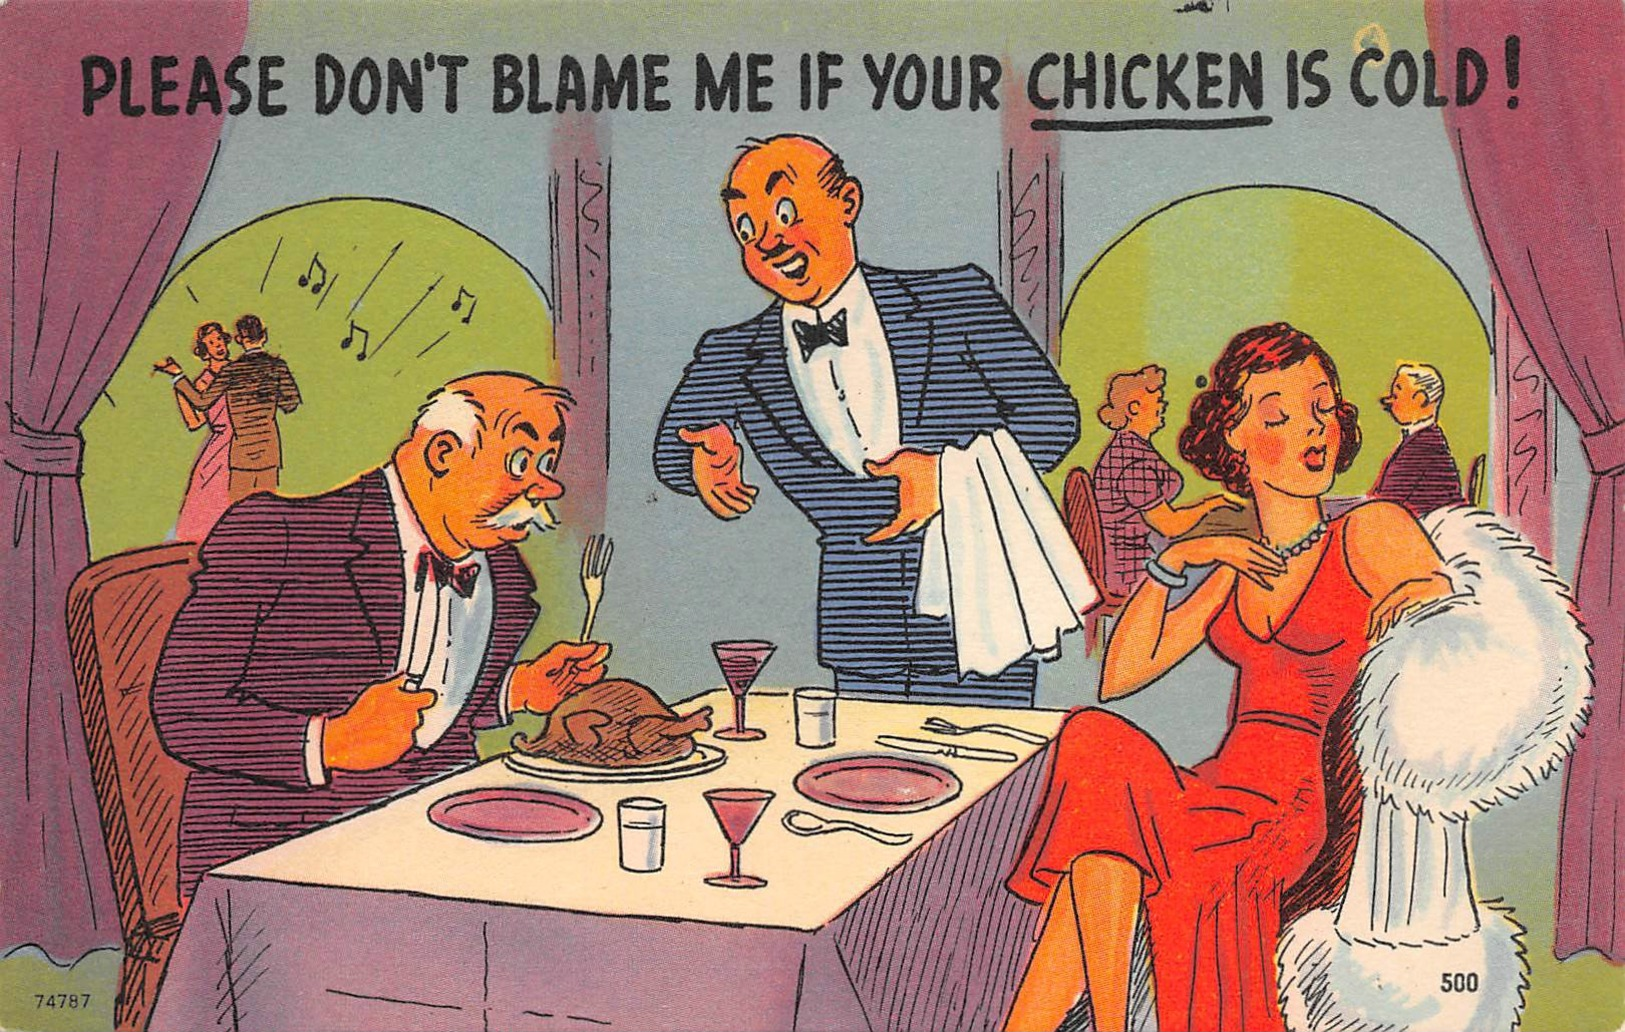 HUMOUR // " PLEASE DON'T BLAME ME IF THE CHICKEN IS COLD " - Humor